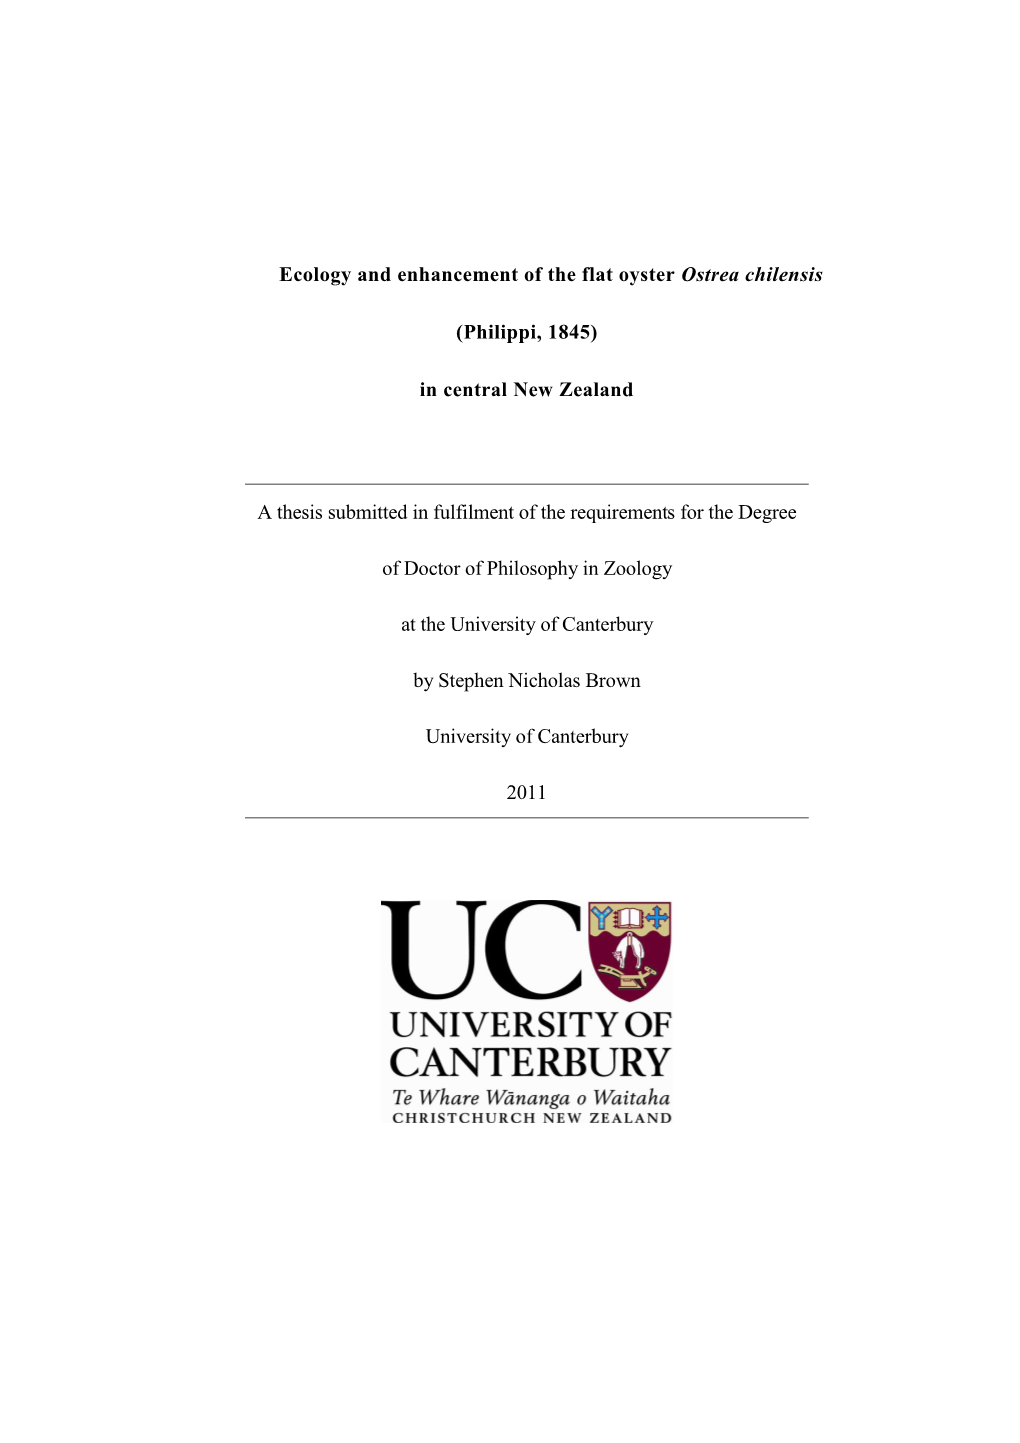 Thesis Done Dec 2011